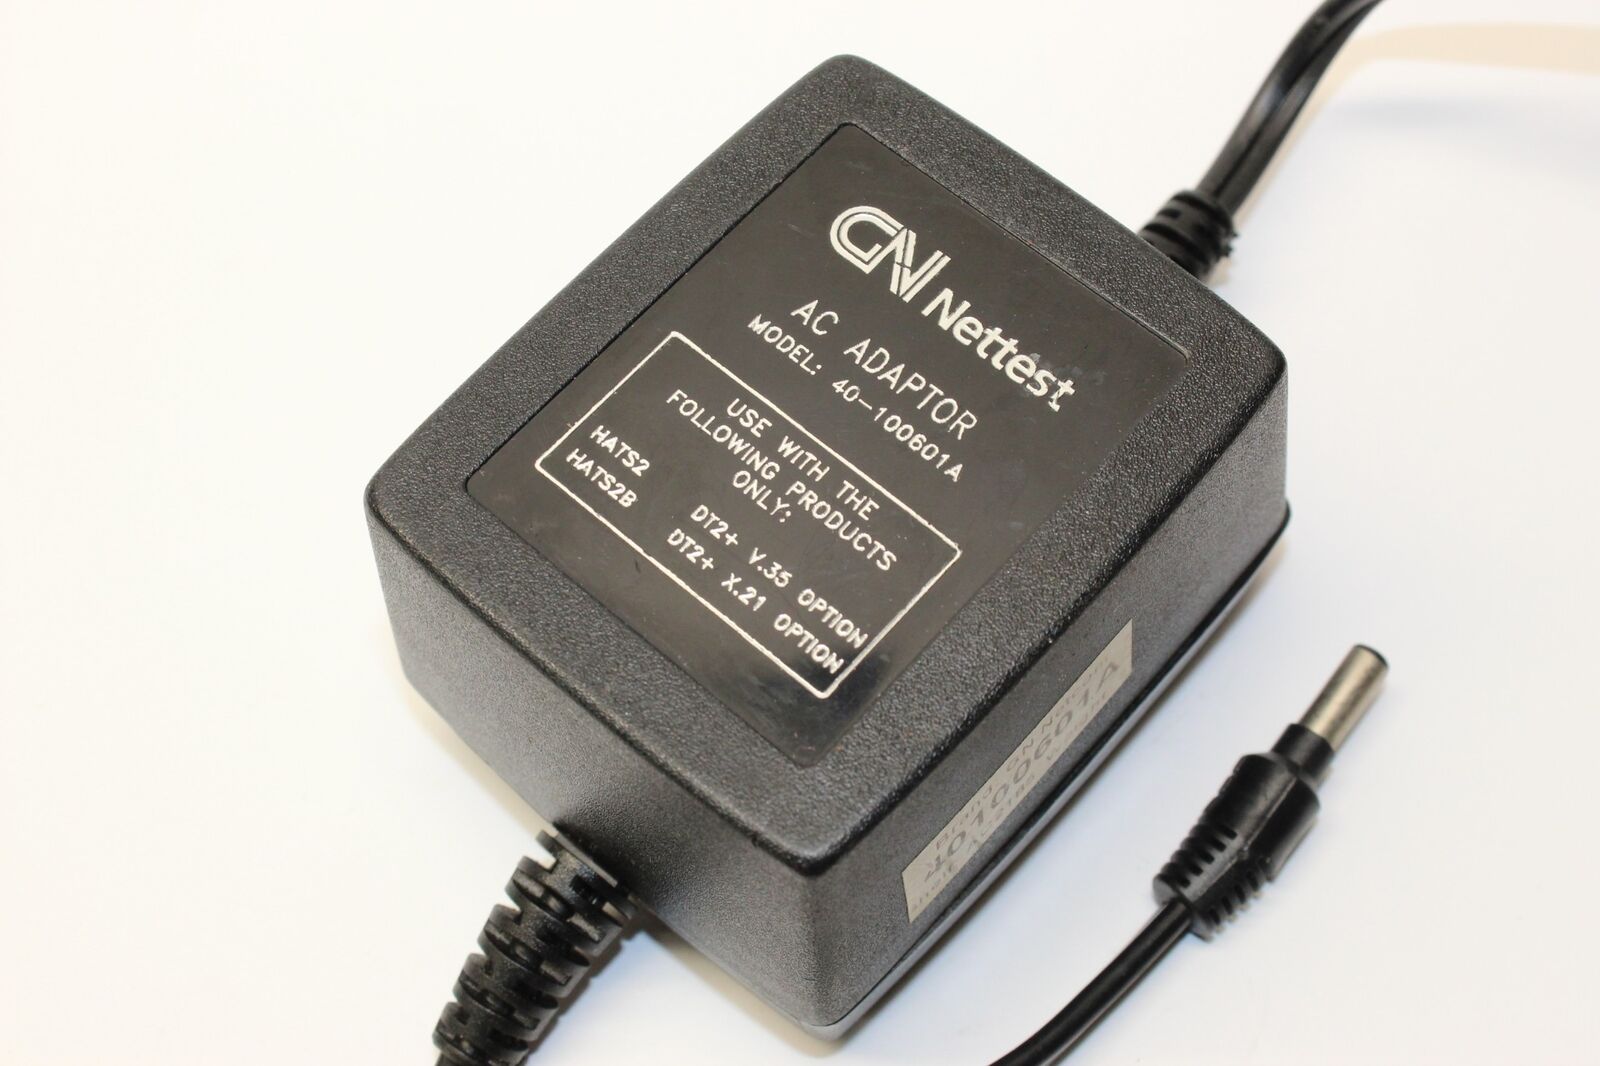 Genuine GN Nettest 40-100601A Power Supply AC Adapter Output DC 9.5V 1.5A Brand: GN Nettest Type: Adapter MPN: Does